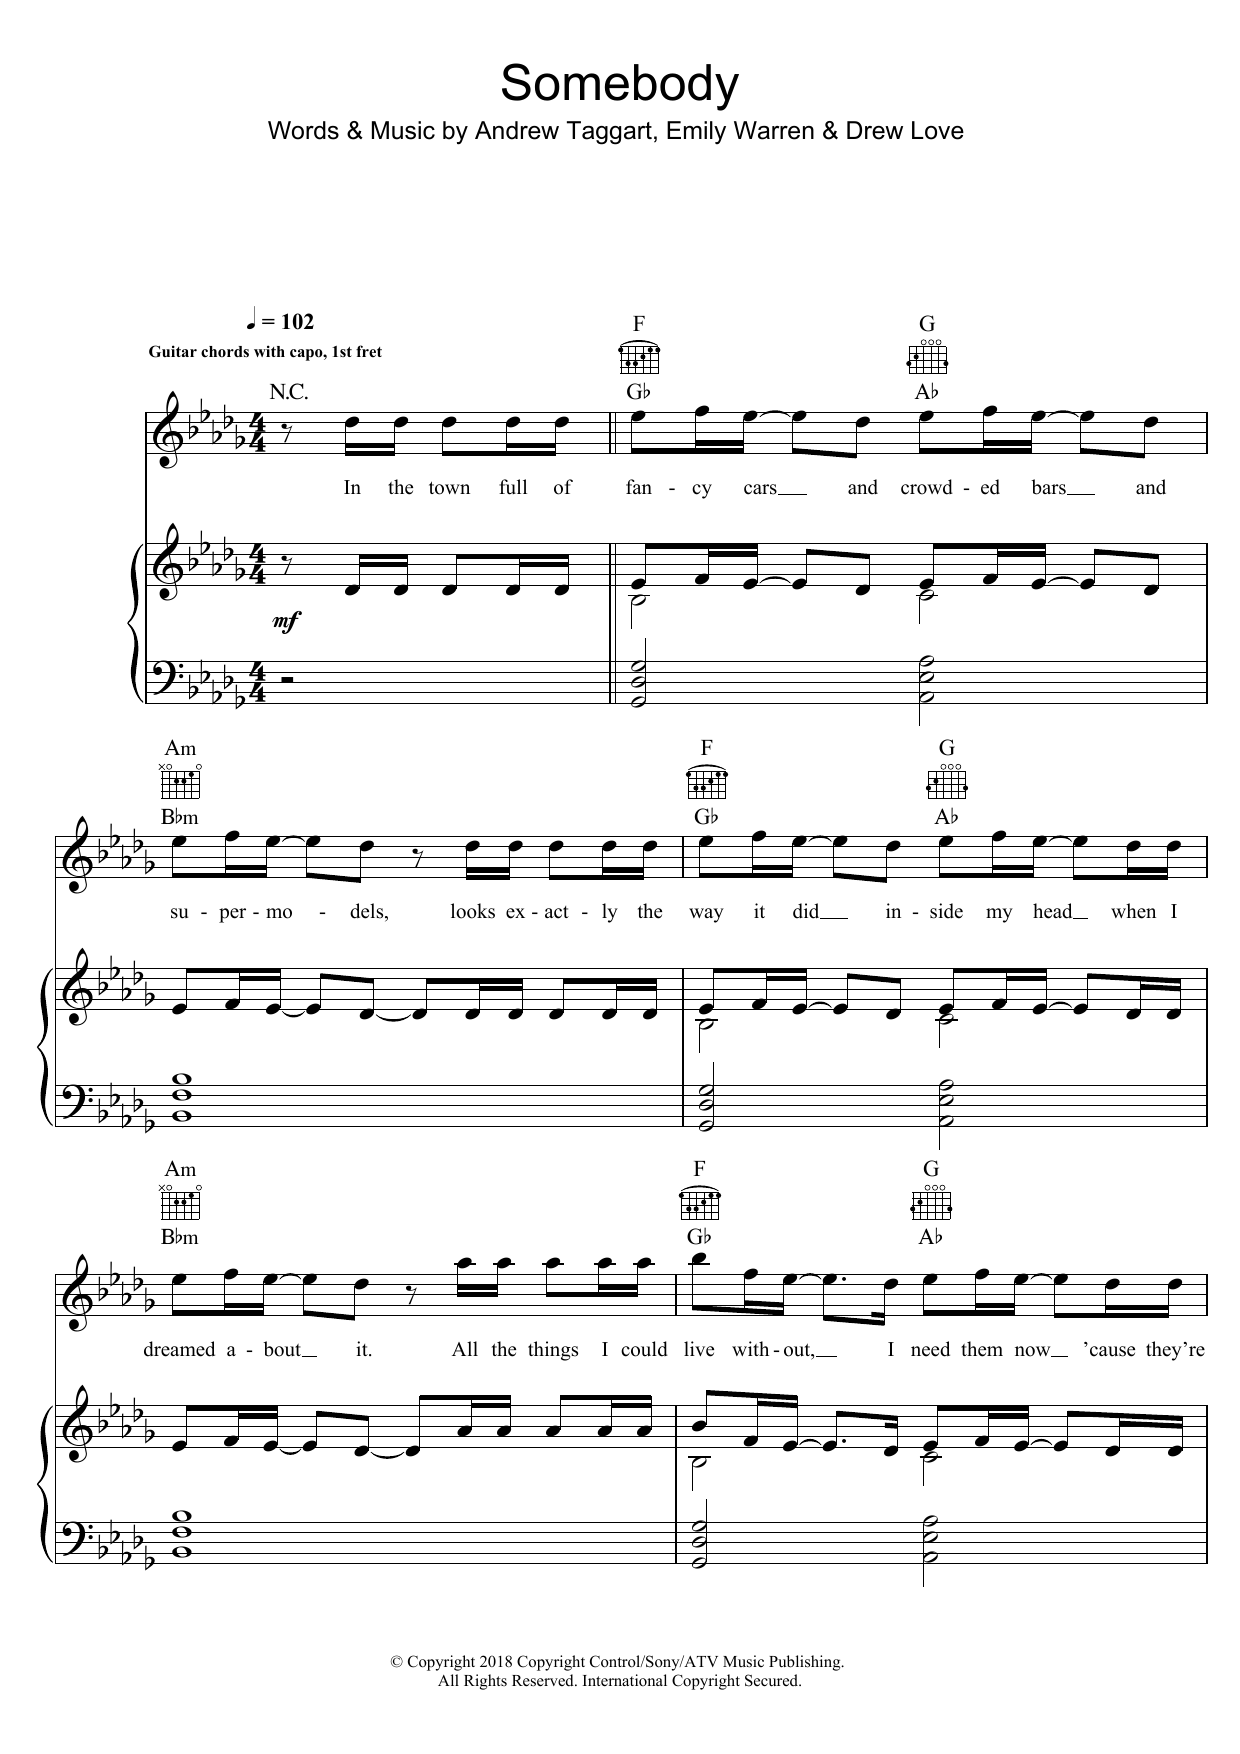 Download The Chainsmokers Somebody Sheet Music